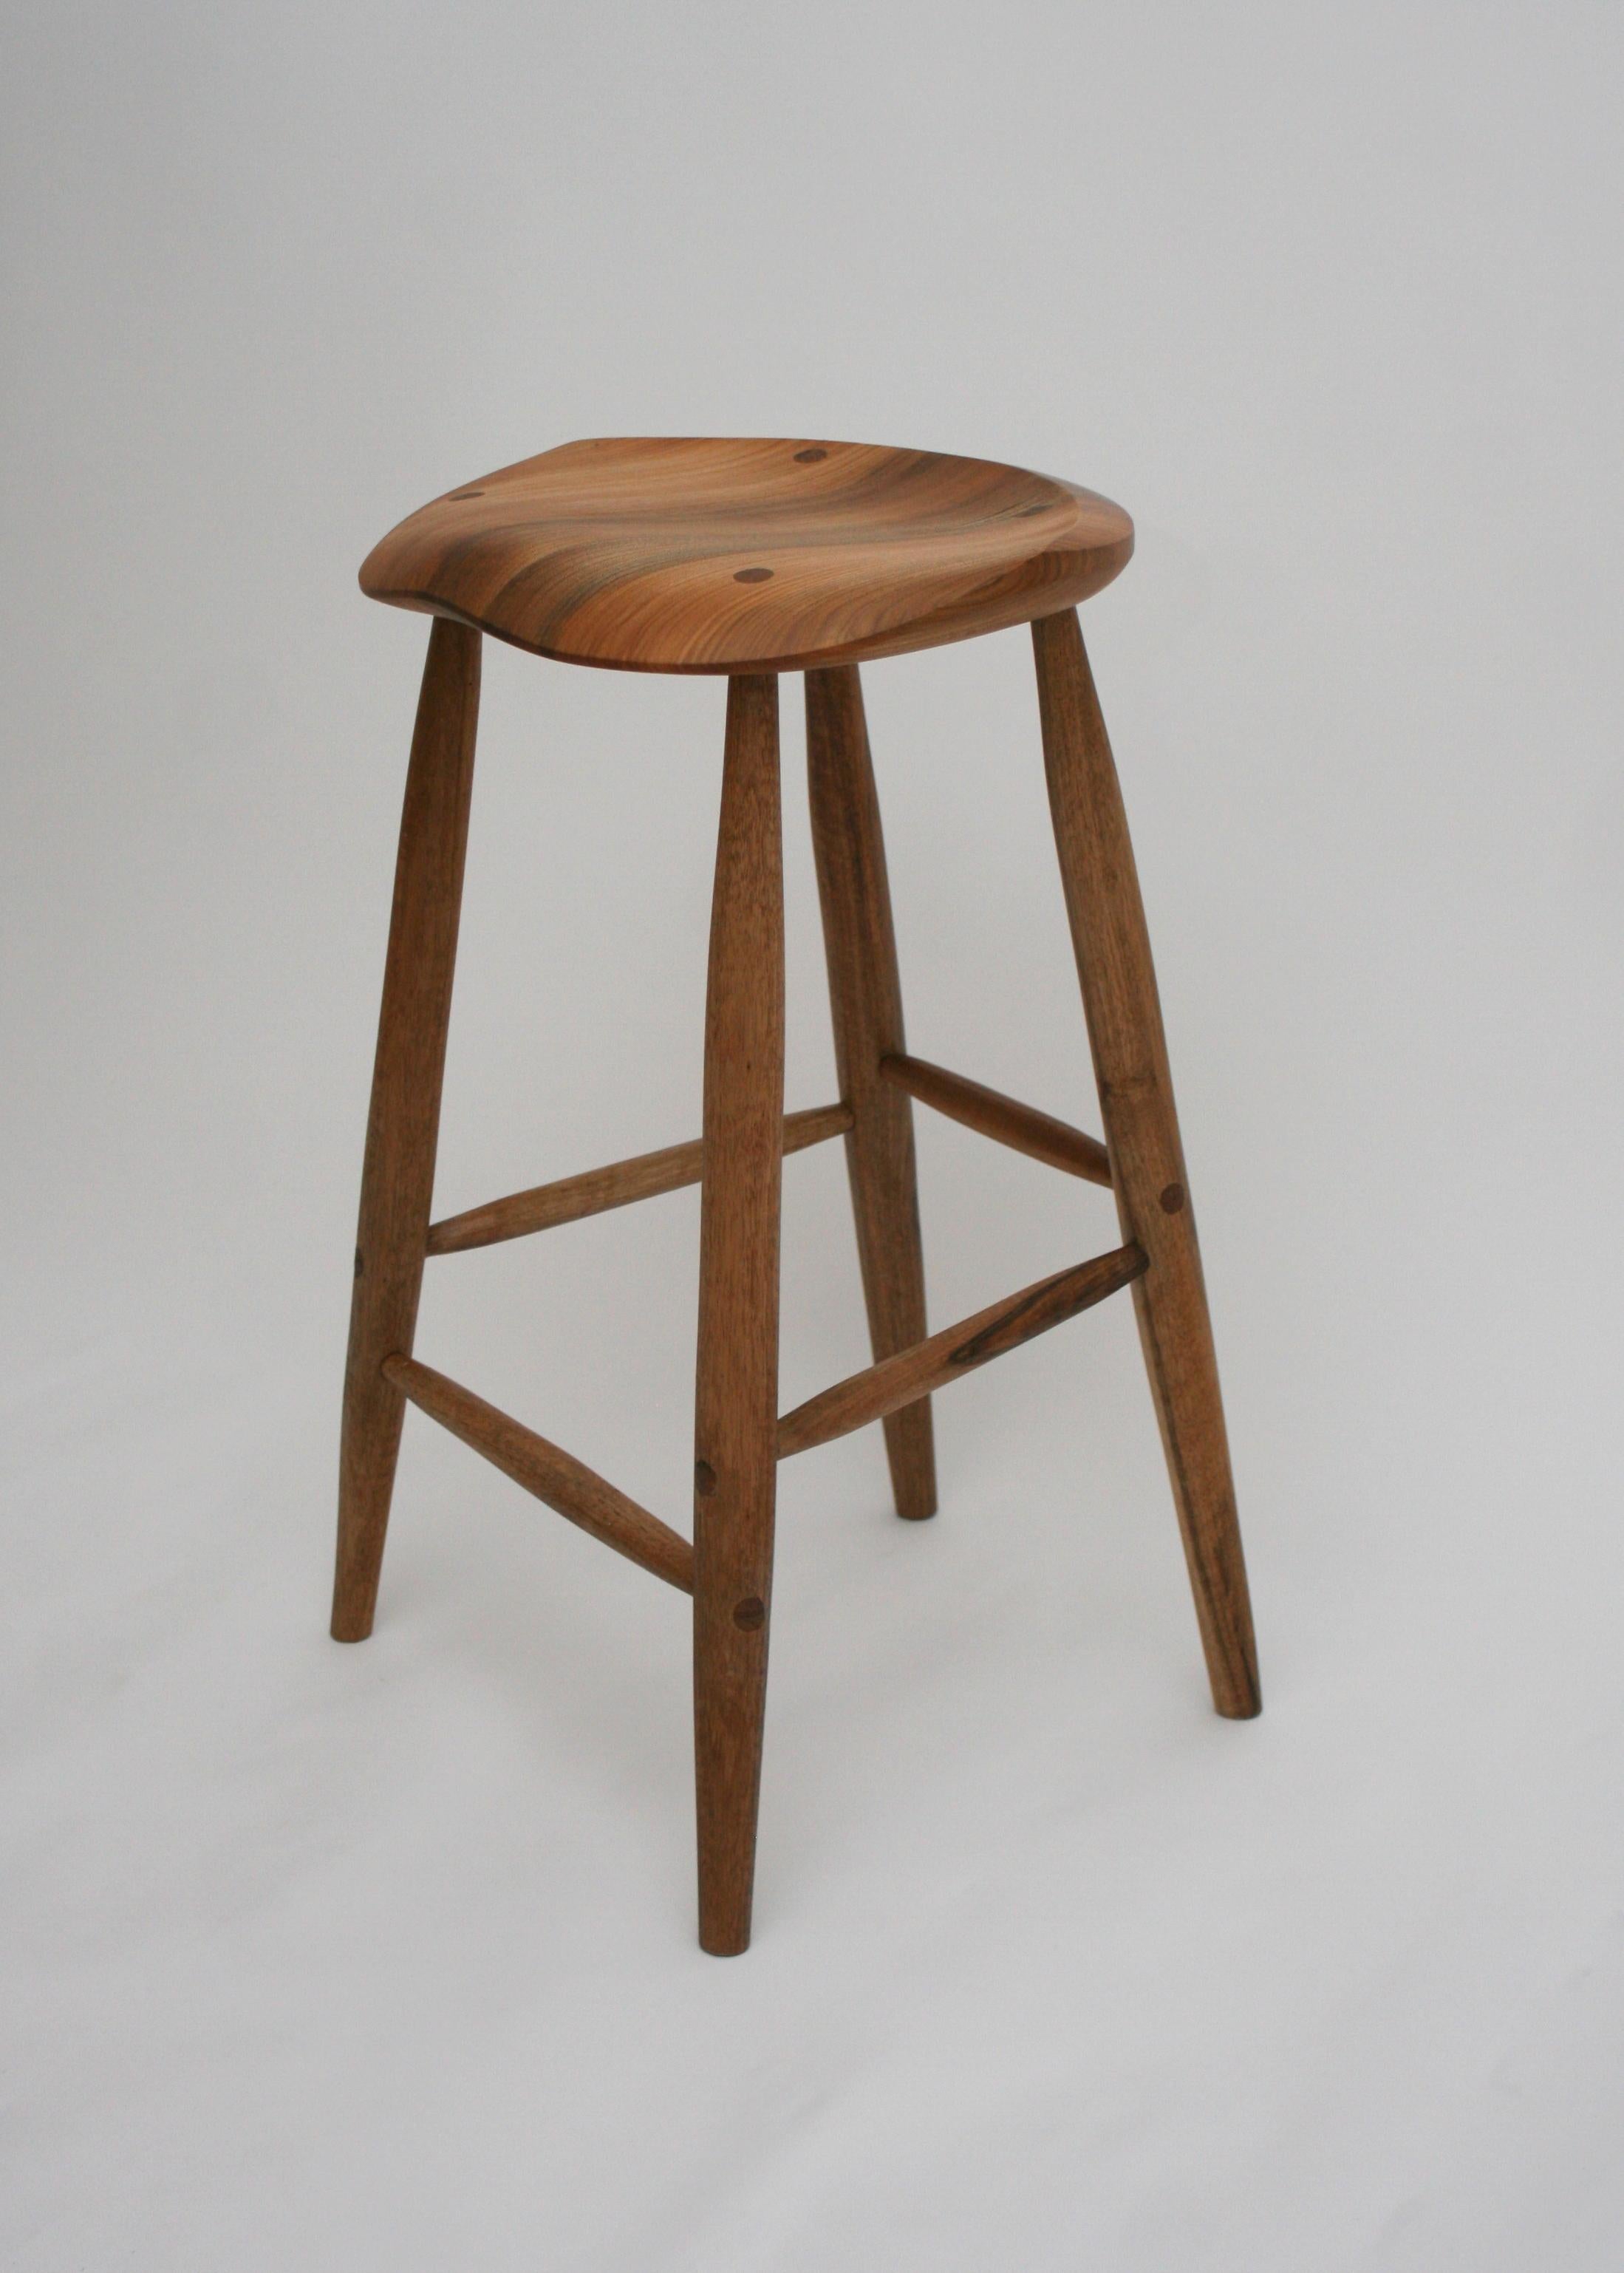 Made to order Stool by German Woodworker Fabian Fischer. Made in the tradition and quality of American Studio Craftsmanship. The price reflects the Stool made in Oak but can also be made in Cherry and Walnut for a 10% addition on the price and 20%